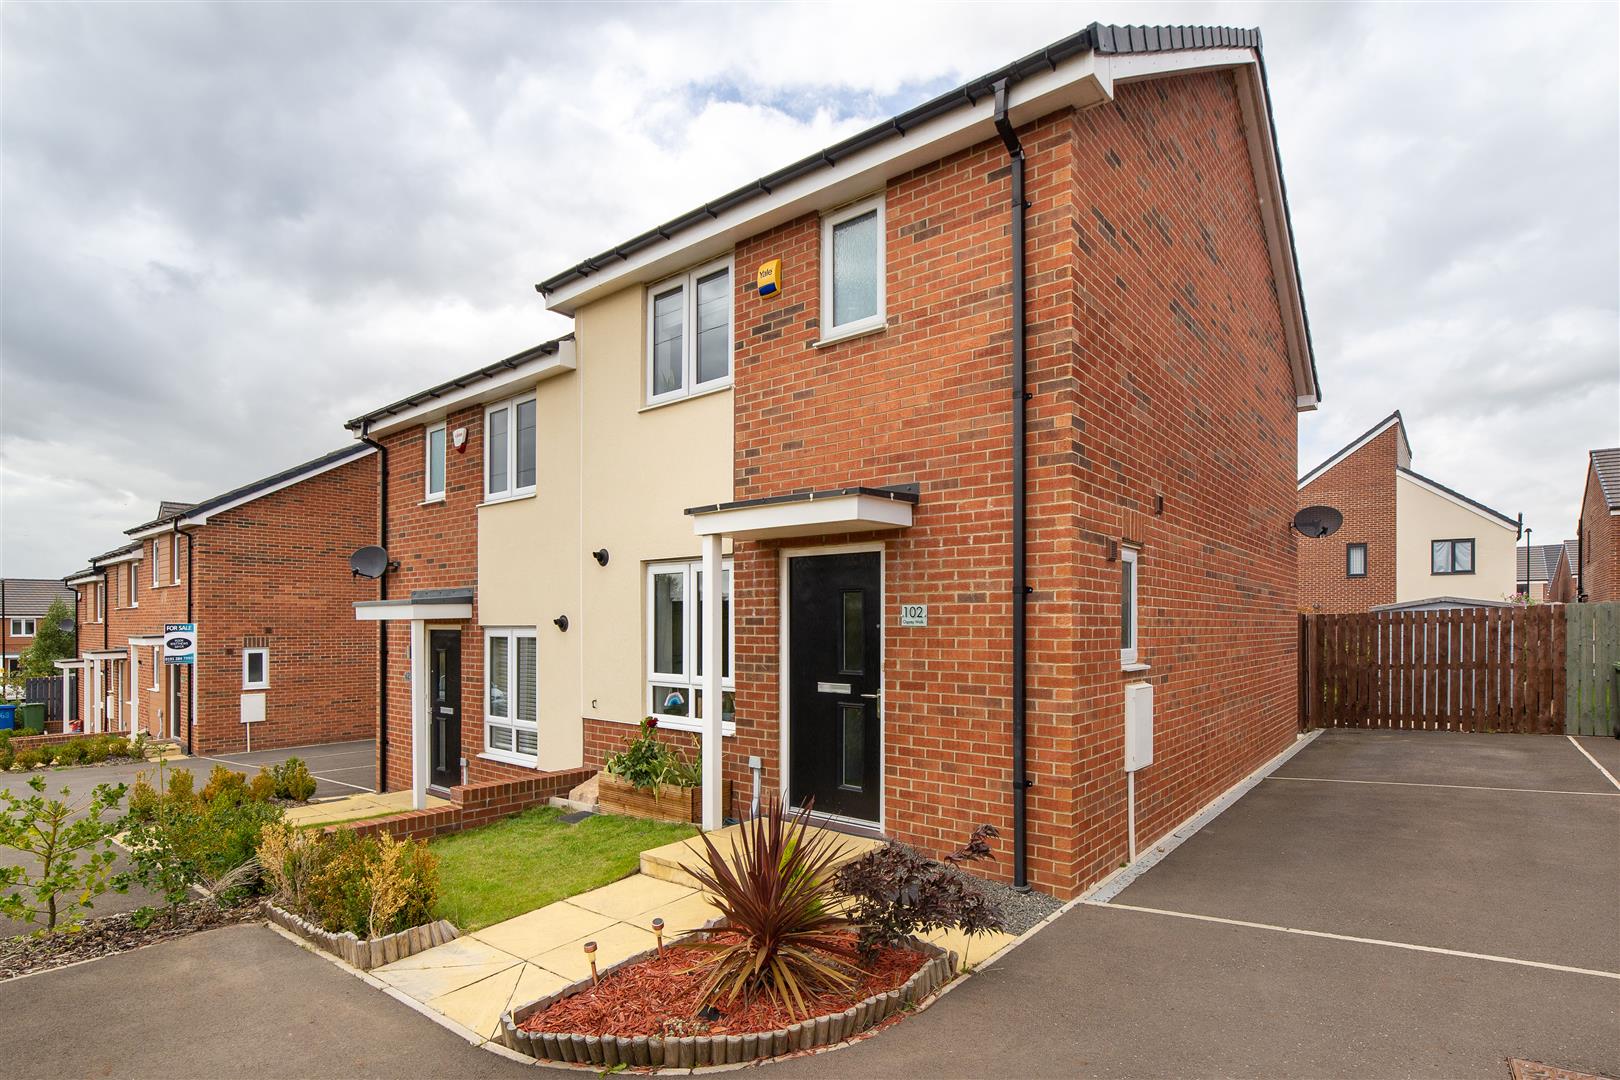 3 bed semi-detached house for sale in Osprey Walk, Great Park - Property Image 1